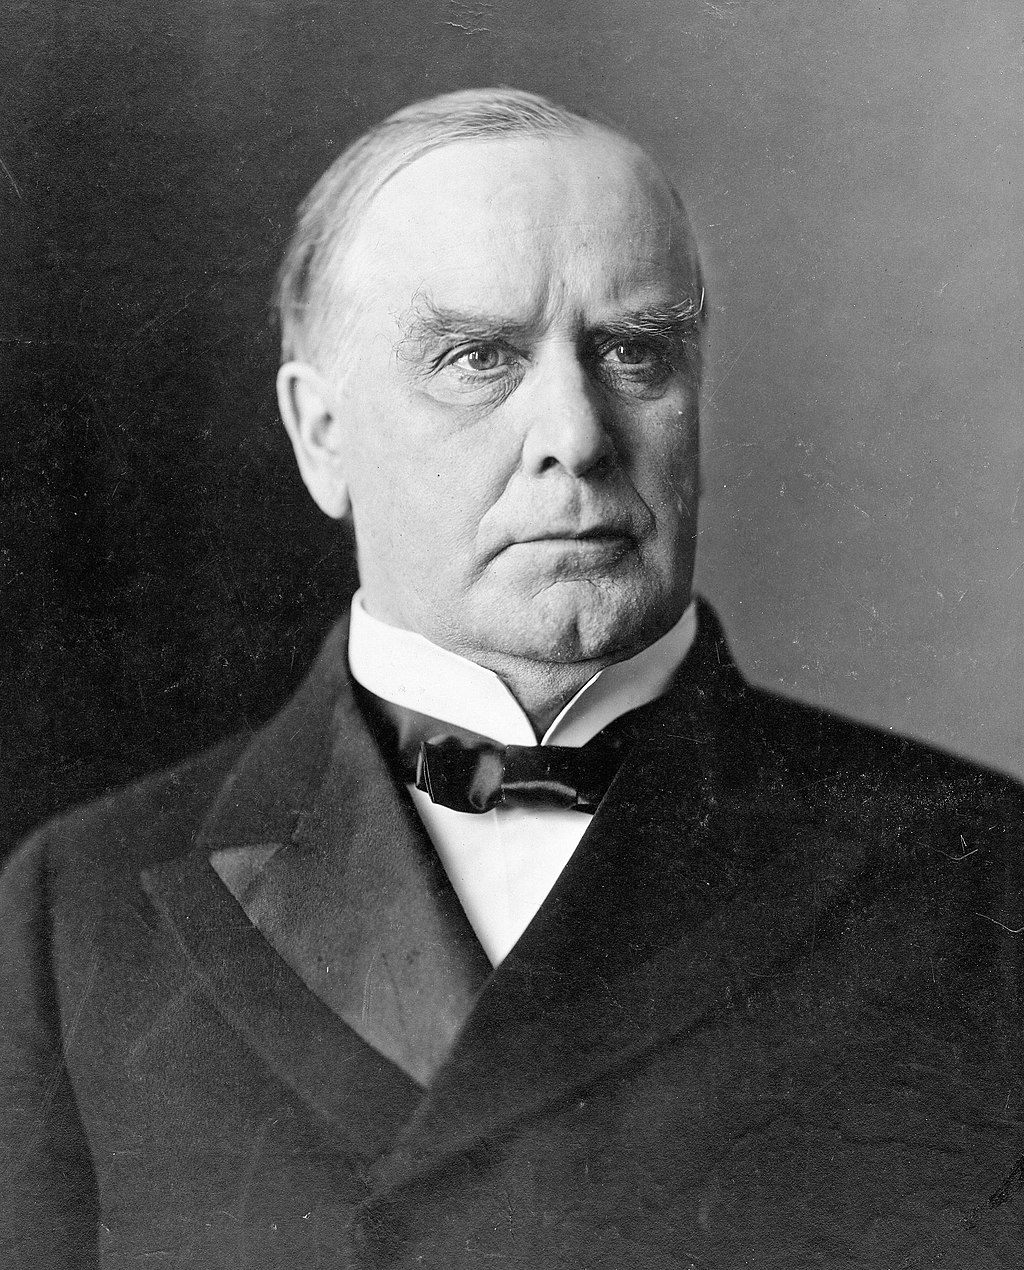 The 25th president of the United States, William McKinley served from March 4, 1897, until his assassination on September 14, 1901.